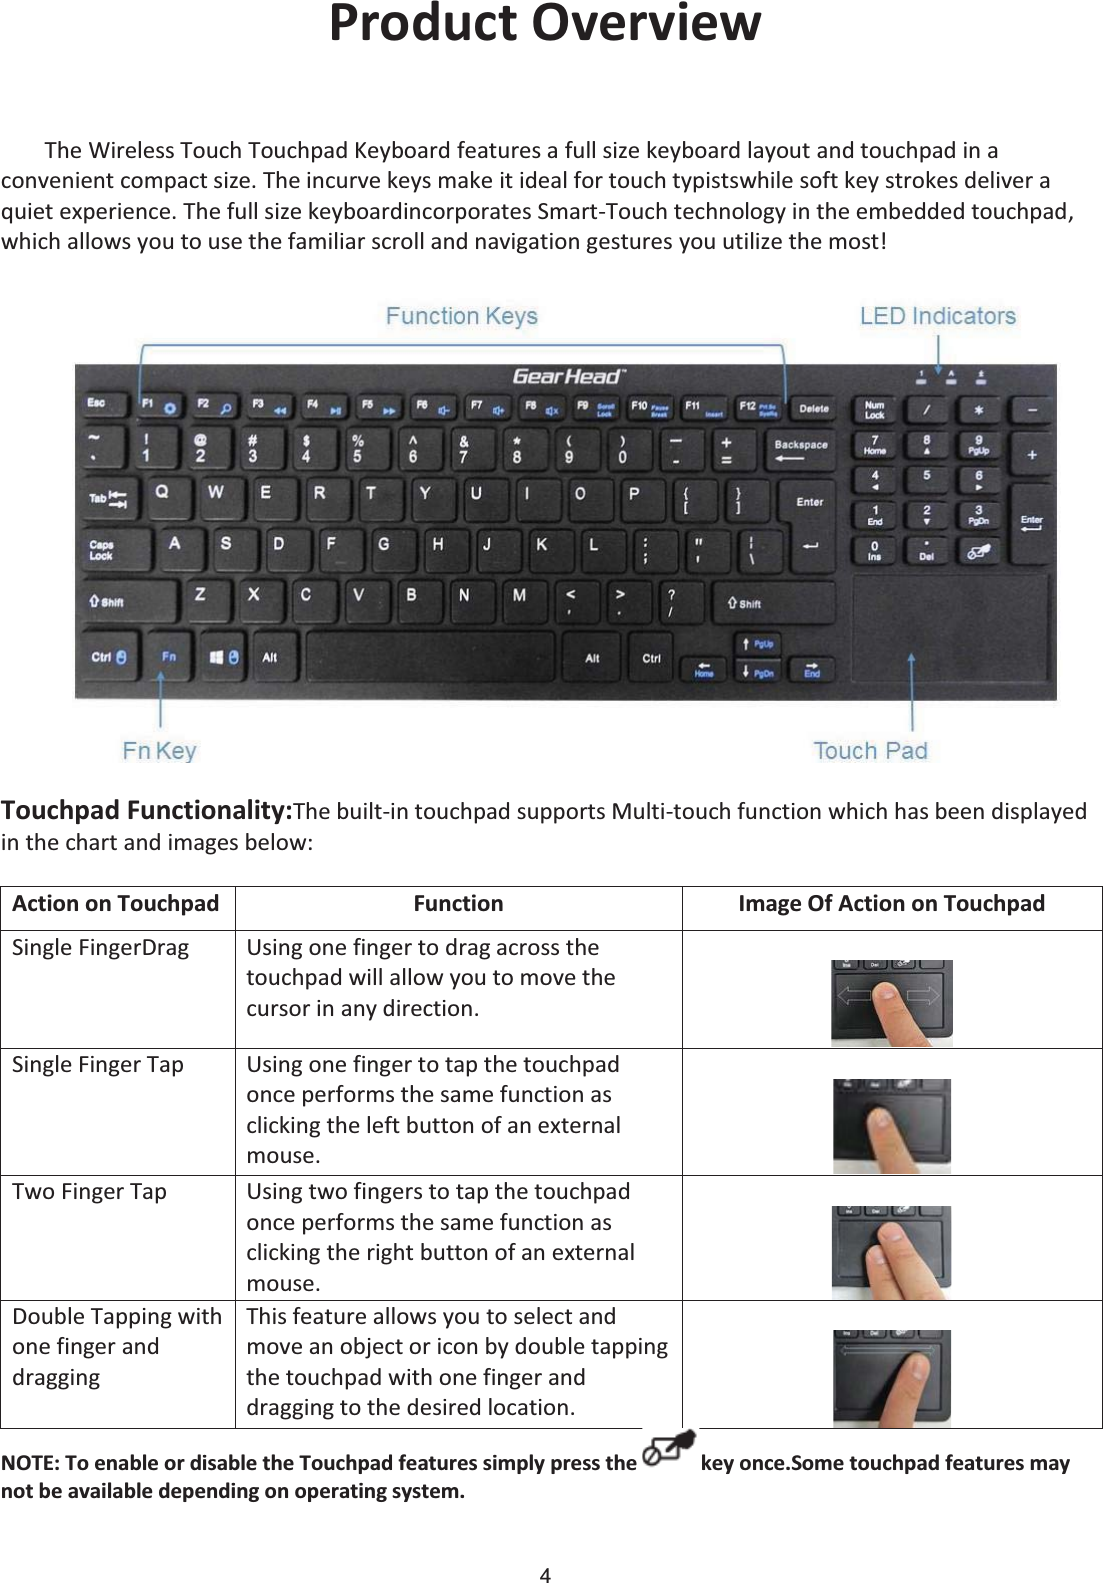 4 Product Overview The Wireless Touch Touchpad Keyboard features a full size keyboard layout and touchpad in a convenient compact size. The incurve keys make it ideal for touch typistswhile soft key strokes deliver a quiet experience. The full size keyboardincorporates Smart-Touch technology in the embedded touchpad, which allows you to use the familiar scroll and navigation gestures you utilize the most! Touchpad Functionality:The built-in touchpad supports Multi-touch function which has been displayed in the chart and images below: Action on Touchpad Function Image Of Action on Touchpad Single FingerDrag Using one finger to drag across the touchpad will allow you to move the cursor in any direction.  Single Finger Tap Using one finger to tap the touchpad once performs the same function as clicking the left button of an external mouse.   Two Finger Tap Using two fingers to tap the touchpad once performs the same function as clicking the right button of an external mouse.   Double Tapping with one finger and dragging This feature allows you to select and move an object or icon by double tapping the touchpad with one finger and dragging to the desired location.   NOTE: To enable or disable the Touchpad features simply press the  key once.Some touchpad features may not be available depending on operating system. 